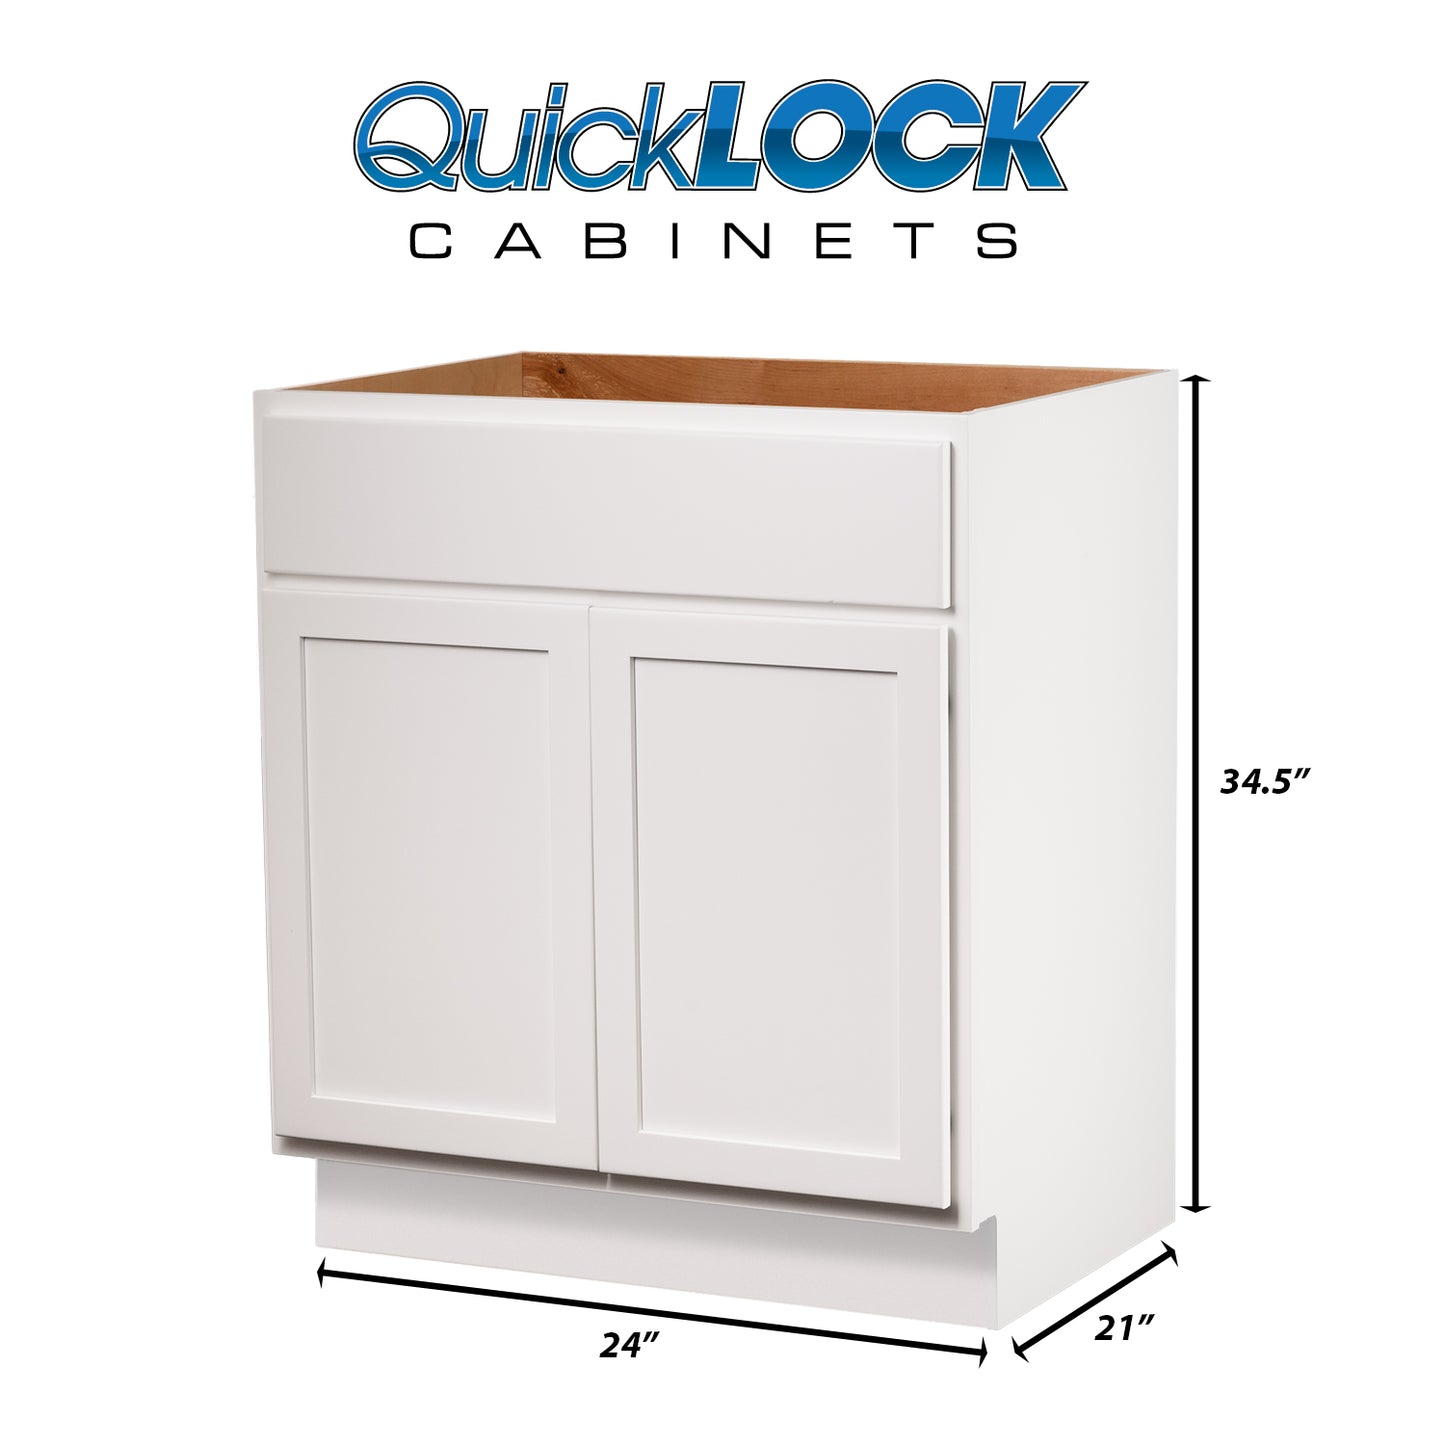 Quicklock RTA (Ready-to-Assemble) Pure White Vanity Base Cabinet | 24"Wx34.5"Hx21"D